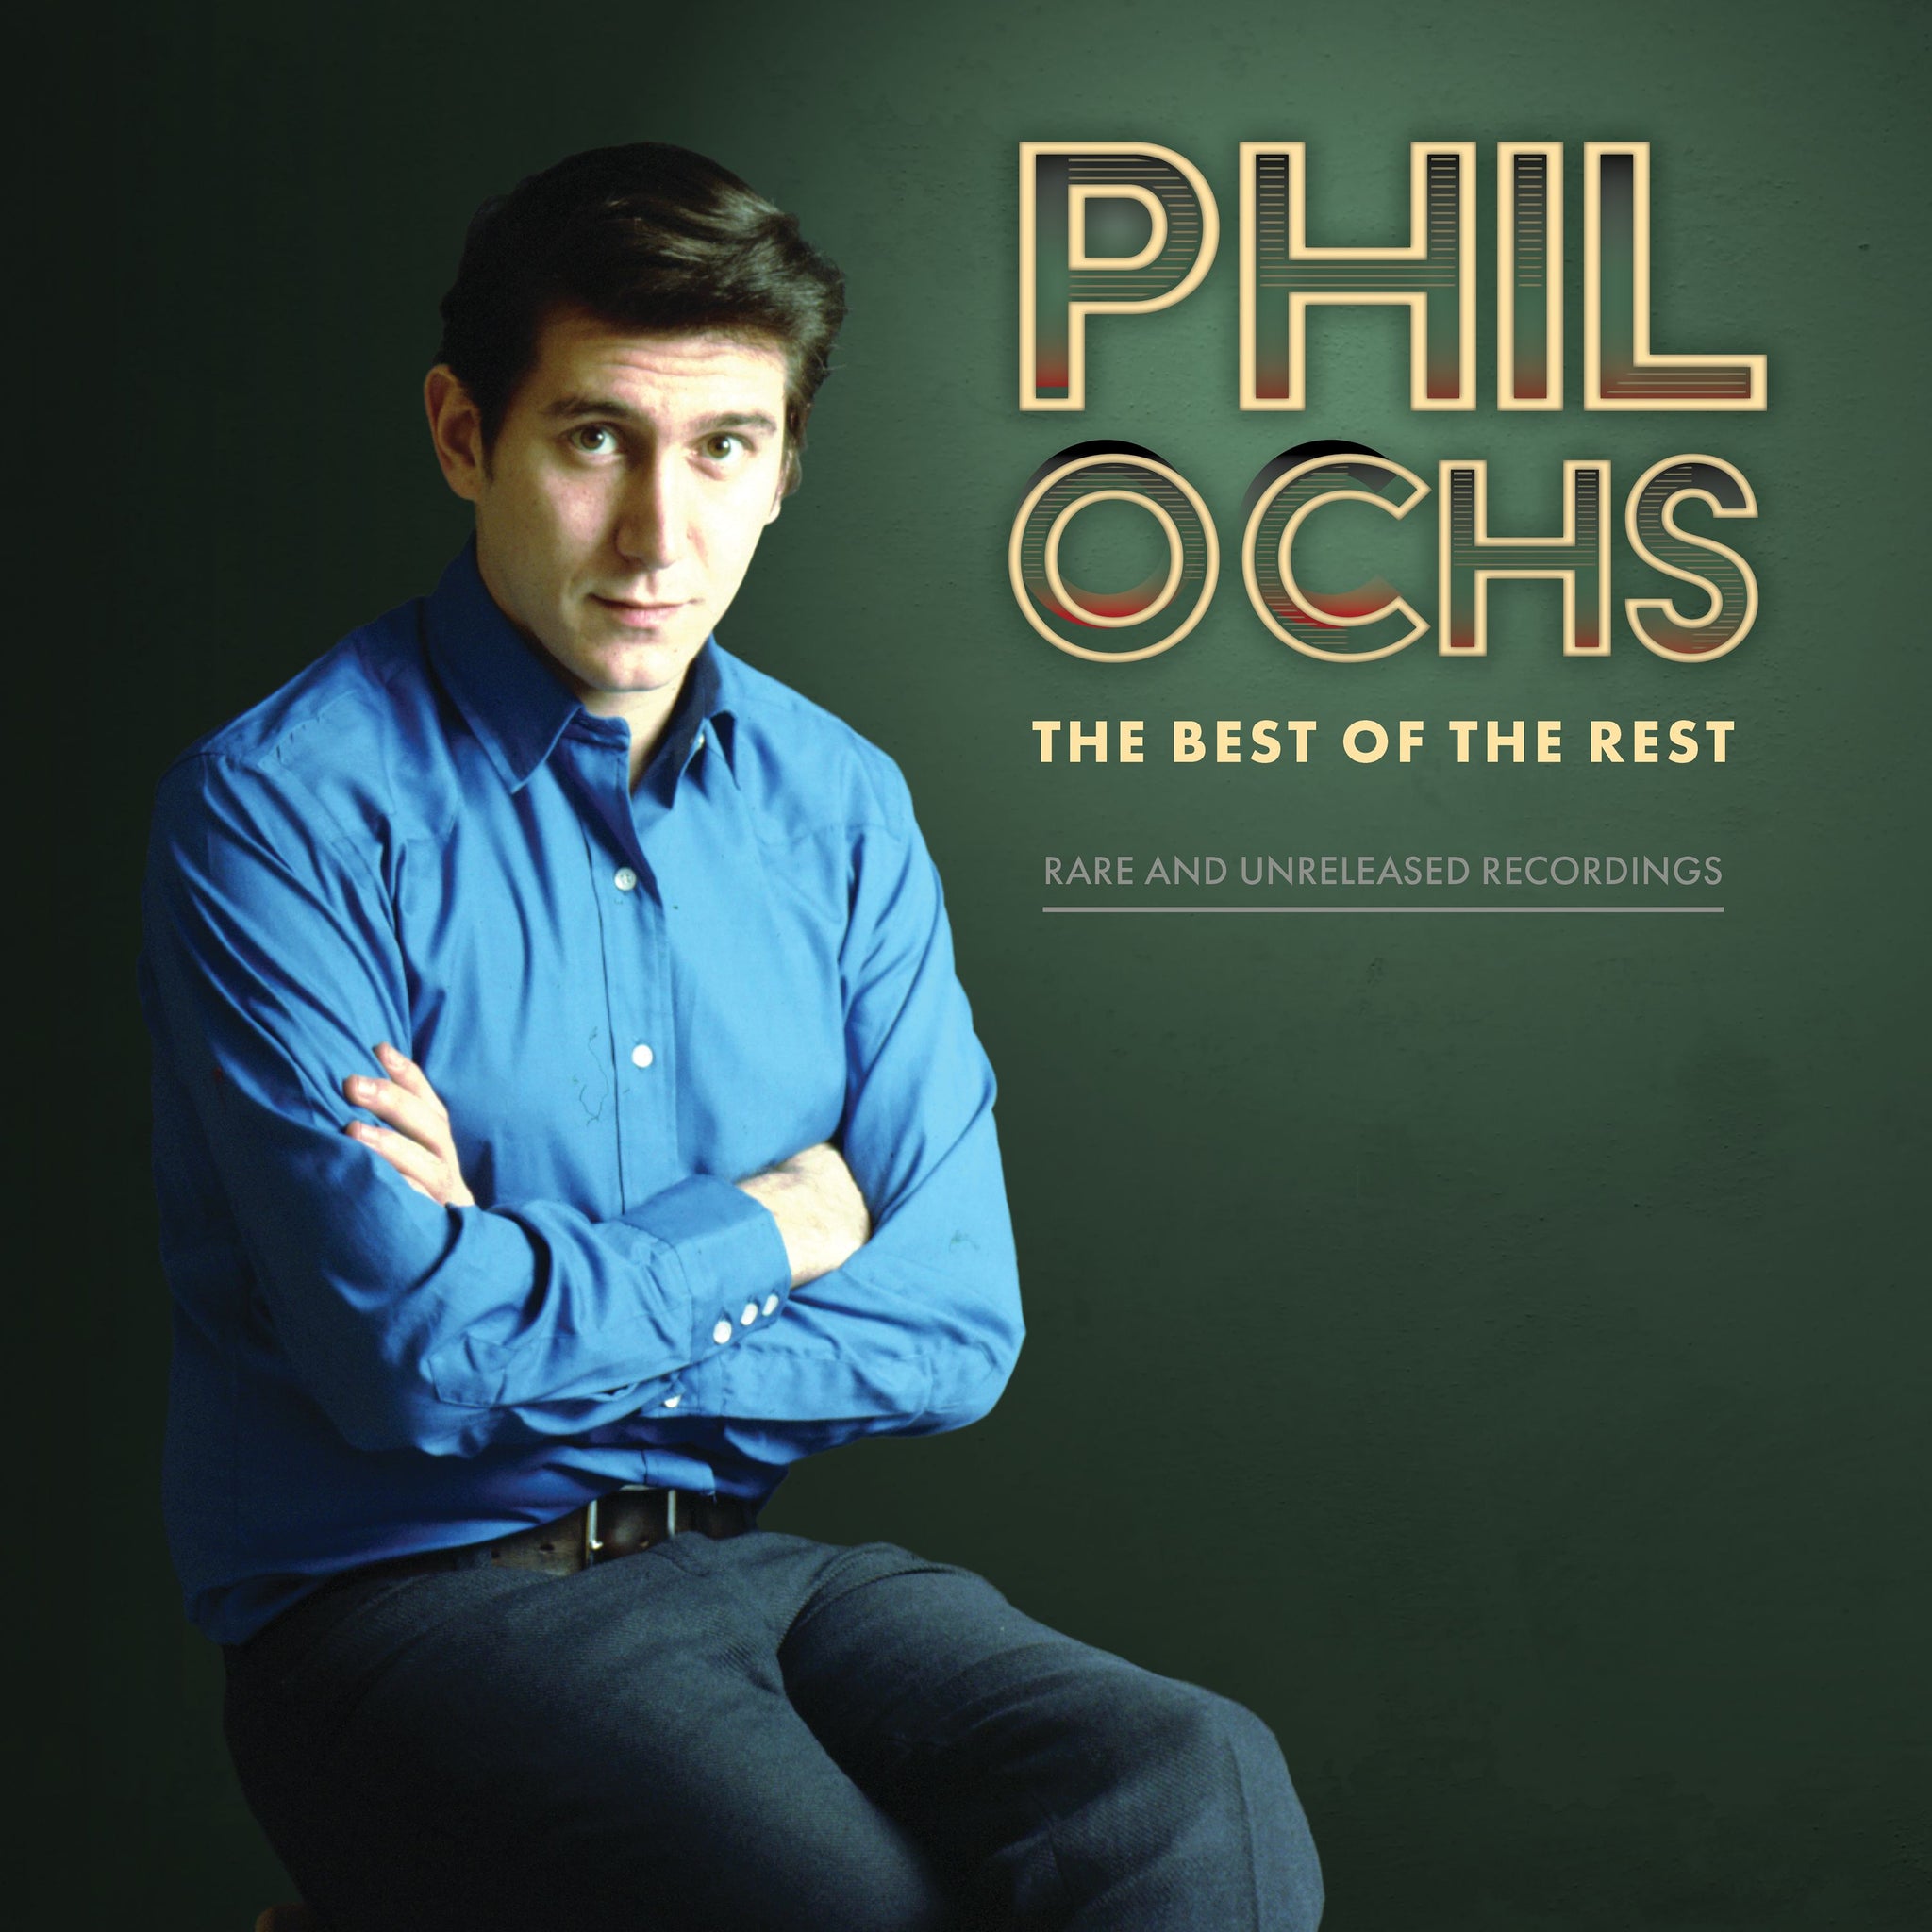 PHIL OCHS - Best of the Rest: Rare and Unreleased Recordings - 2LP - Vinyl [RSD23]